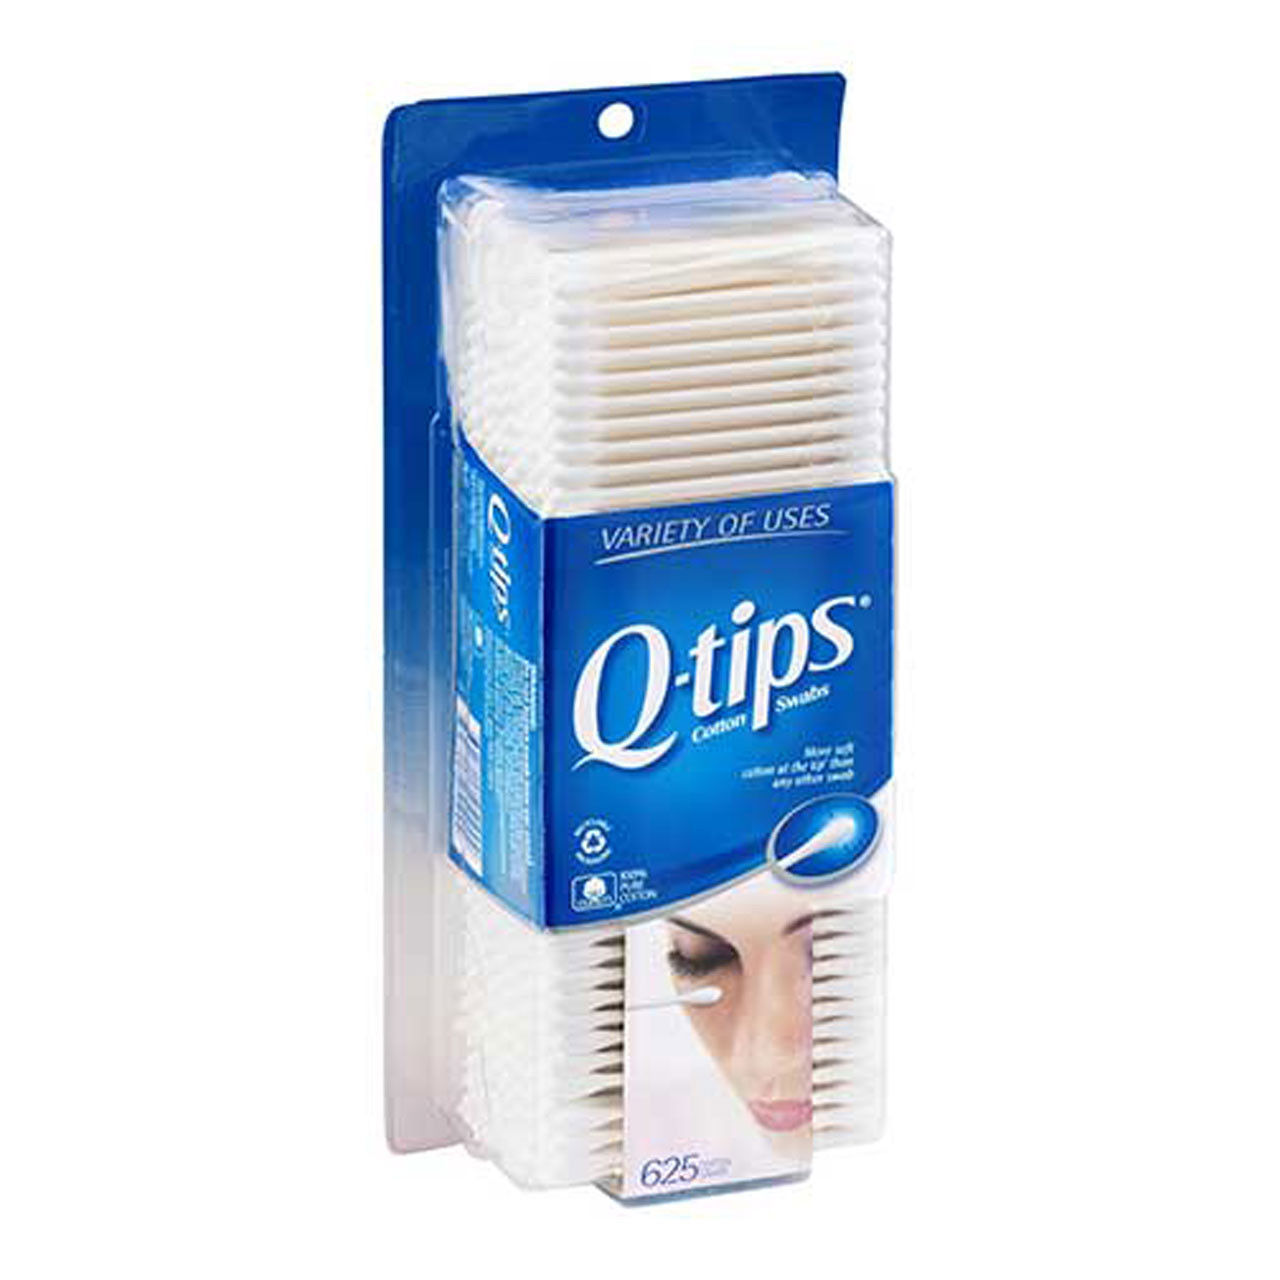 Why were Q-tips called baby gays?